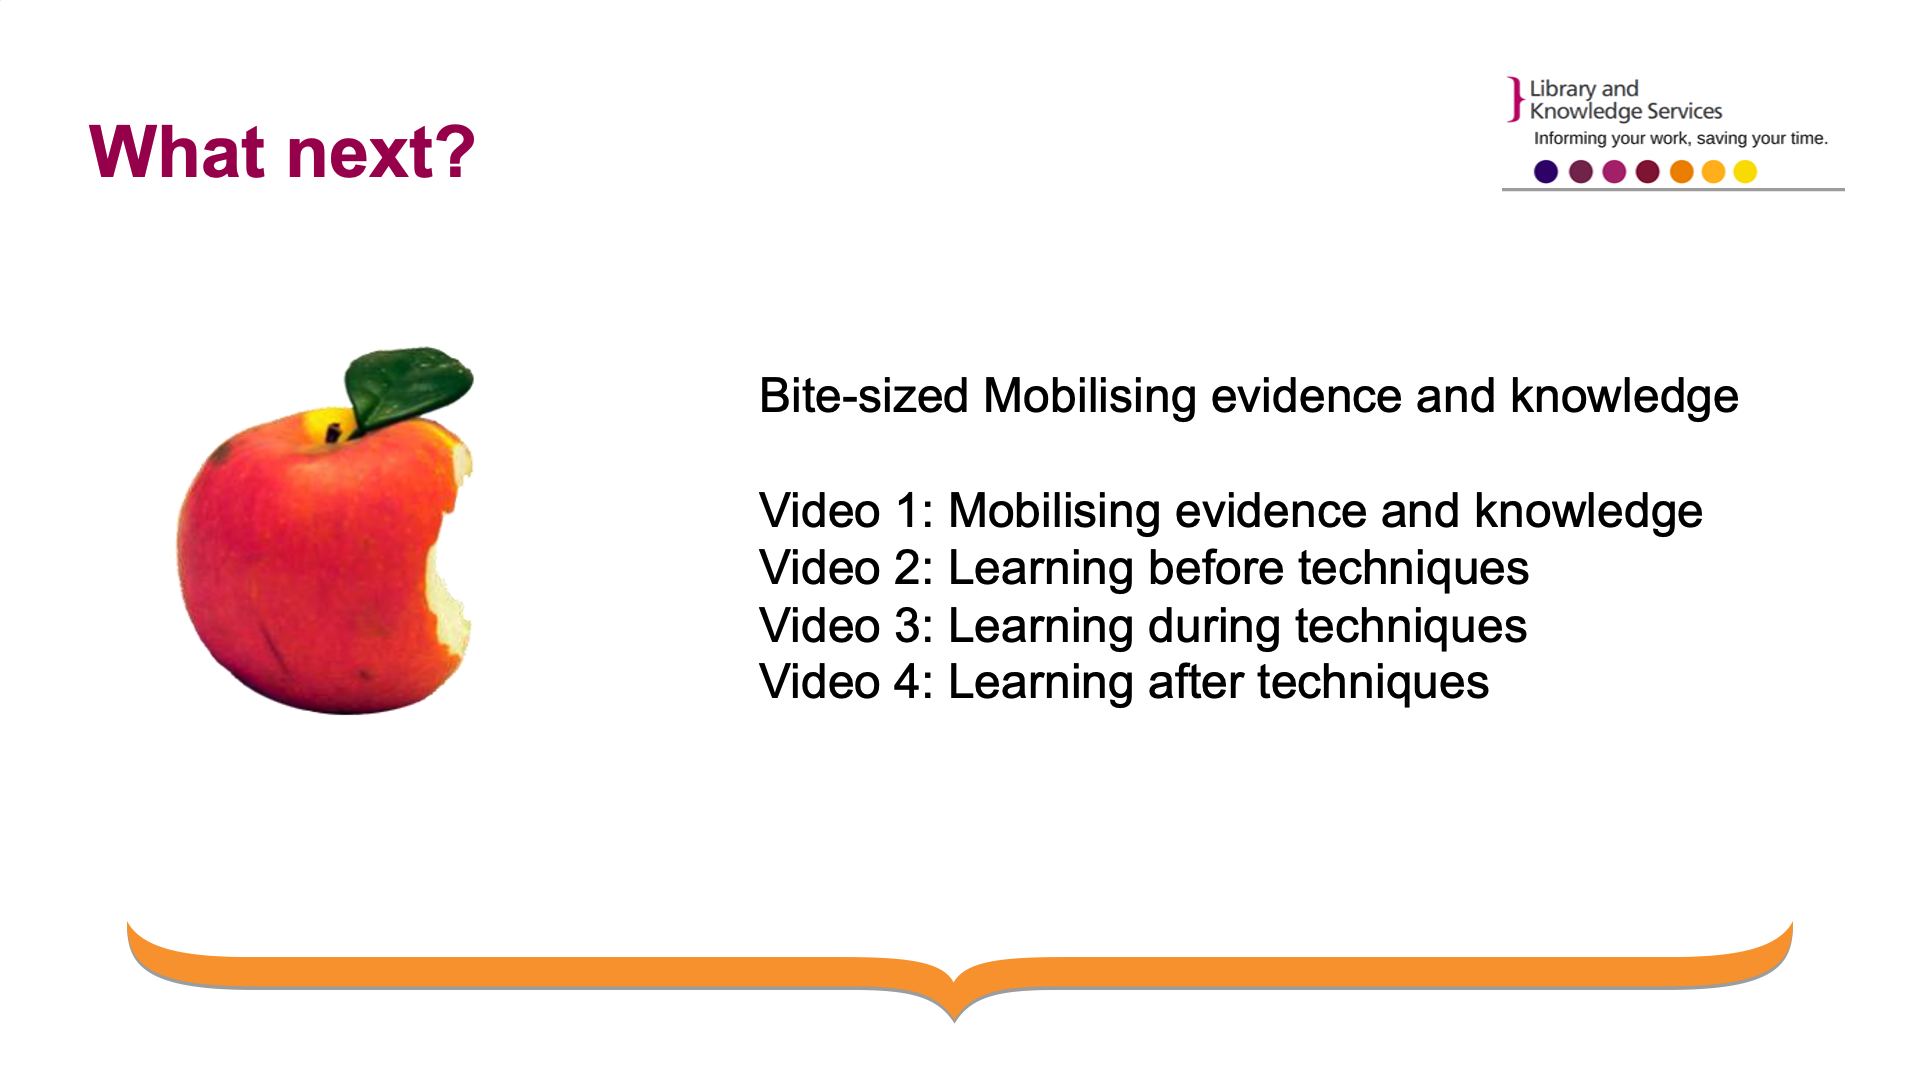 Slide 12: Image of an apple with one bite taken out of it. The caption next to it explains the order of the slide shows in the series: Bite-sized Mobilising evidence and knowledge. Video 1: Mobilising evidence and knowledge Video 2: Learning before techniques, Video 3: Learning during techniques,  Video 4: Learning after techniques